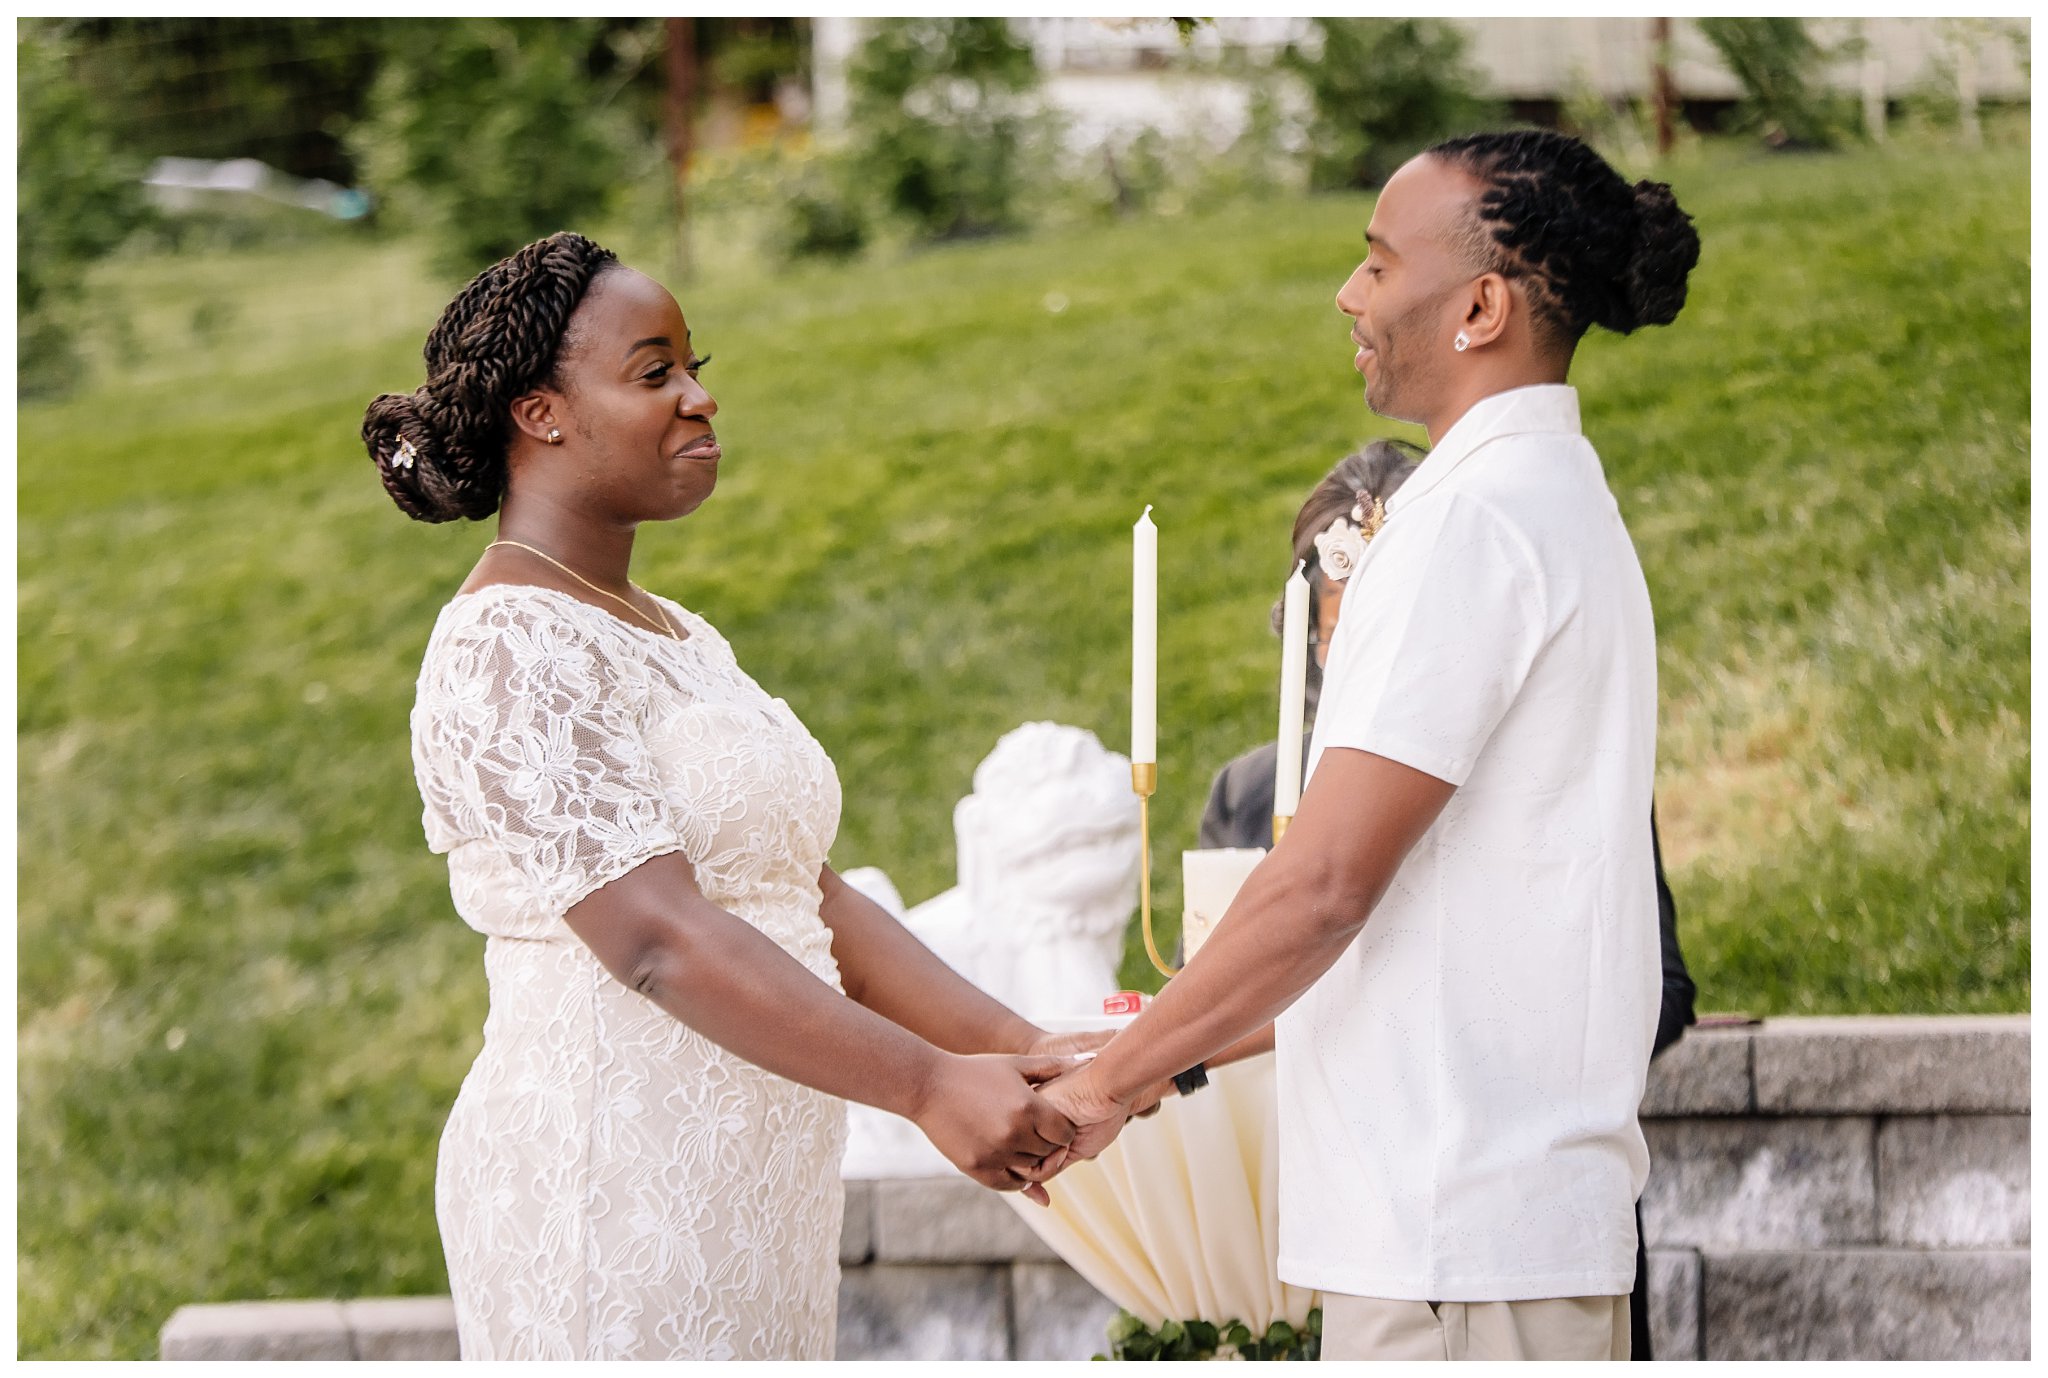 Darcia and Tyler celebrated their intimate wedding with close friends and family in Fairmount. September 2020. Joanna Young Photography. 
